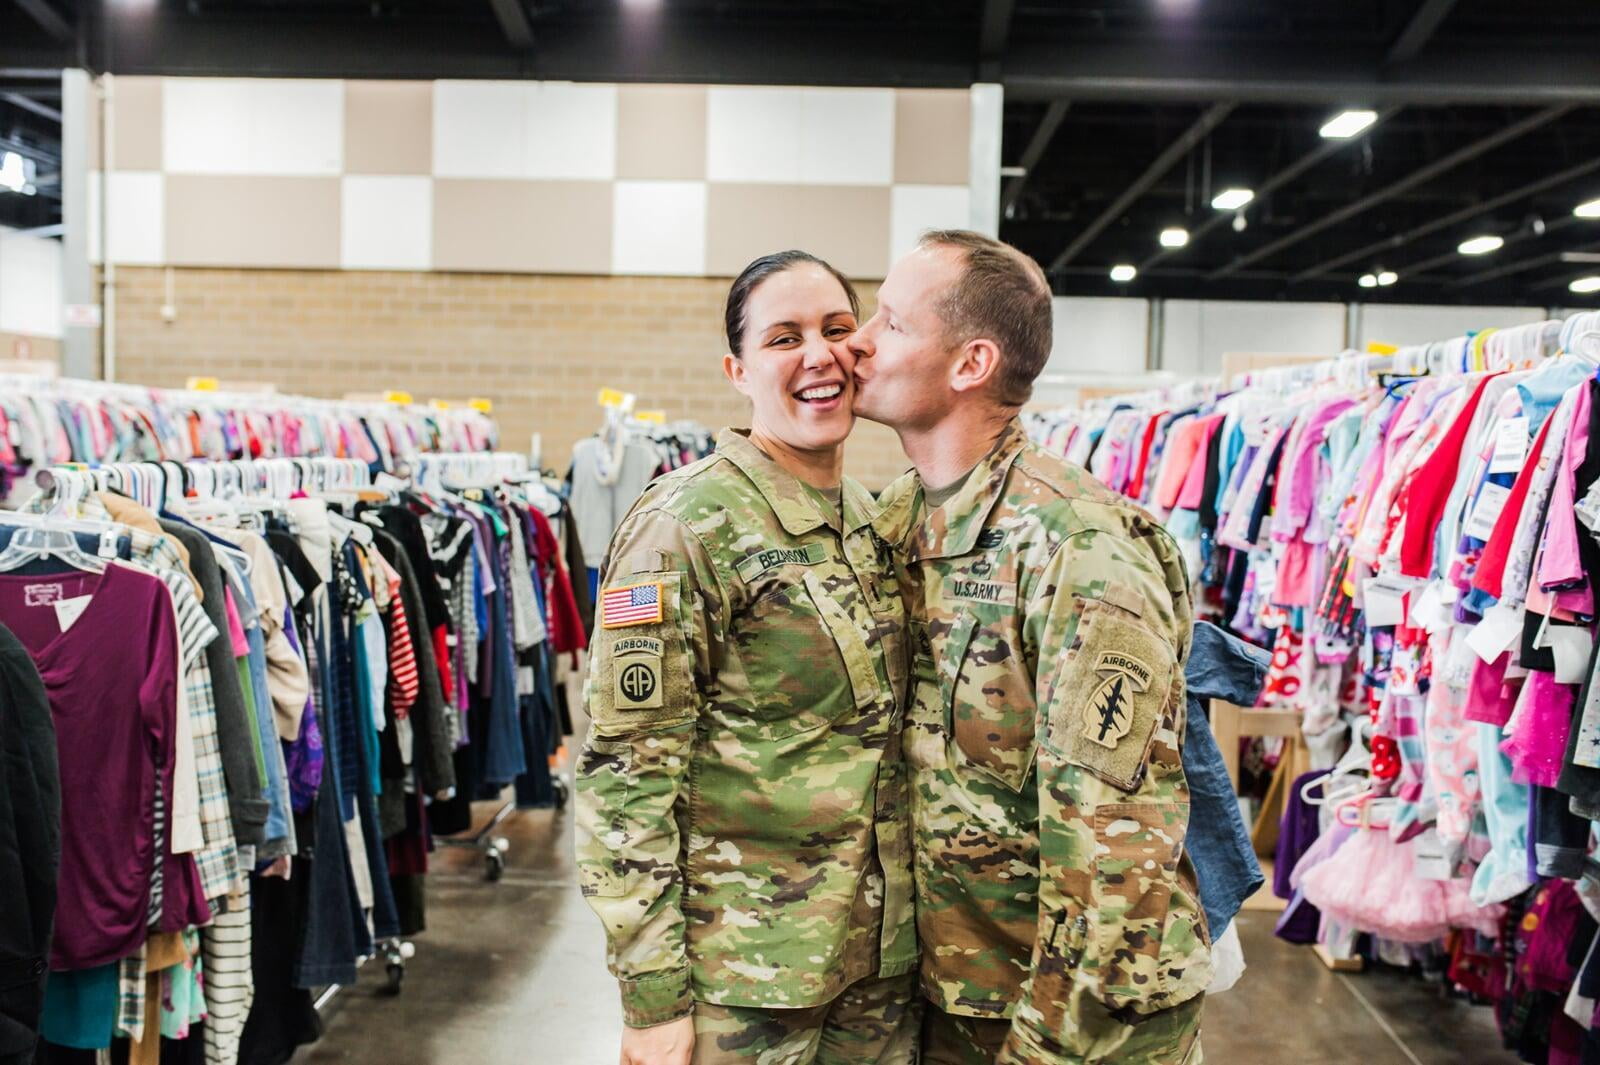 A military husband in camo kisses his military wife, also in camo, at the JBF sale.